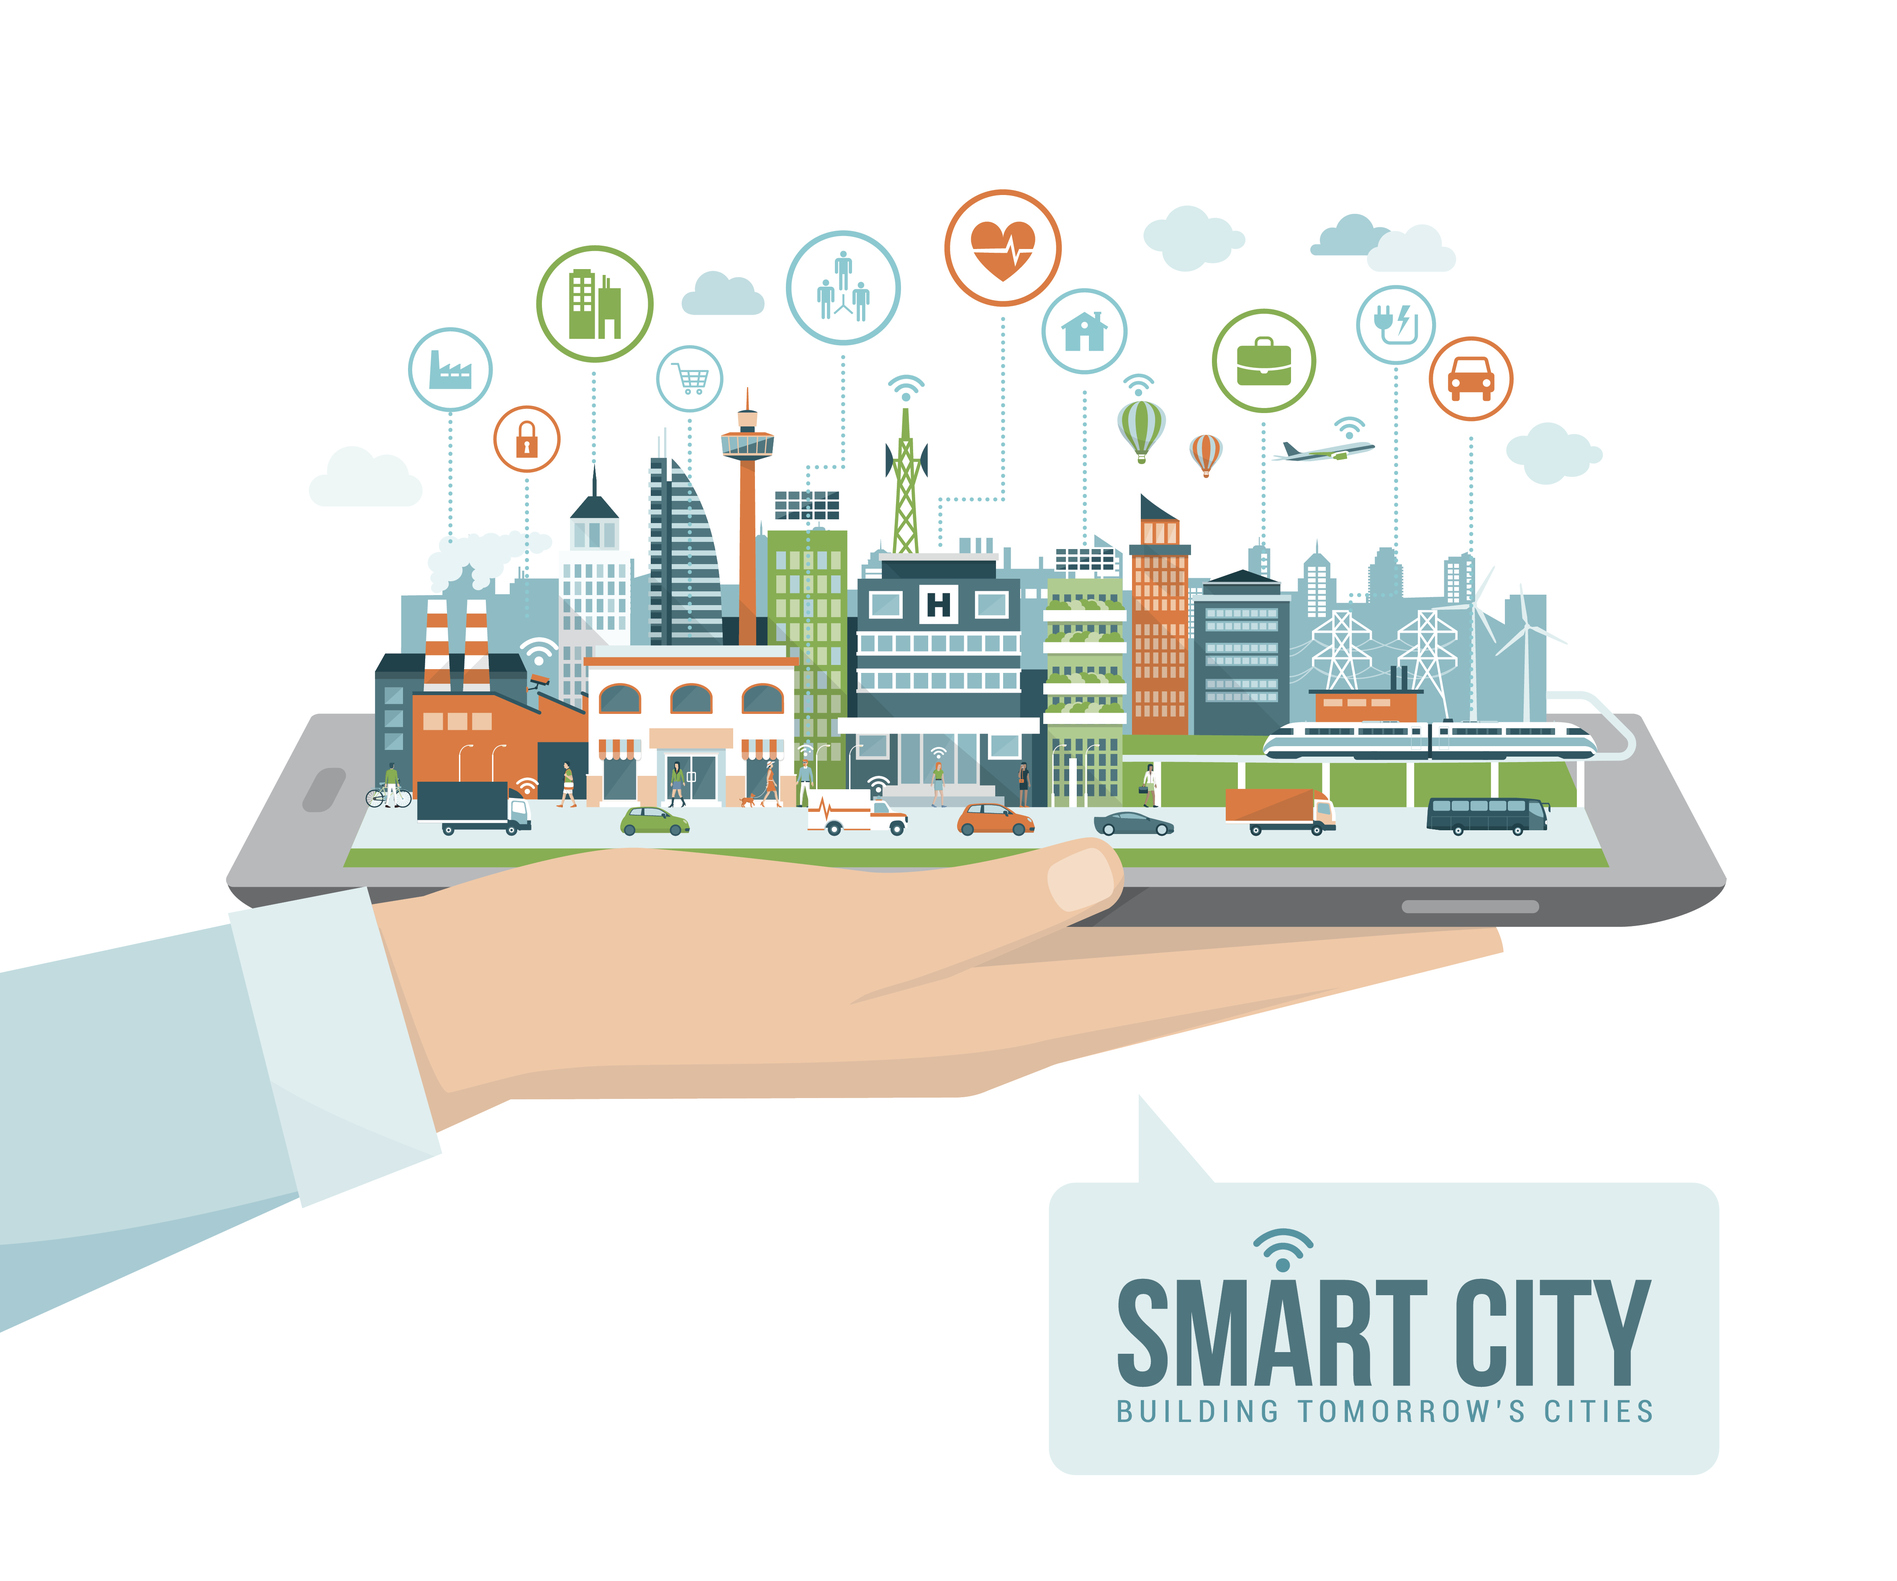 06/07/2017: LIVE INTERACTIVE WEBINAR, Essentials of Smart City Applications, Wednesday, June 7, 2017, 1:00 pm - 2:00 pm, Eastern